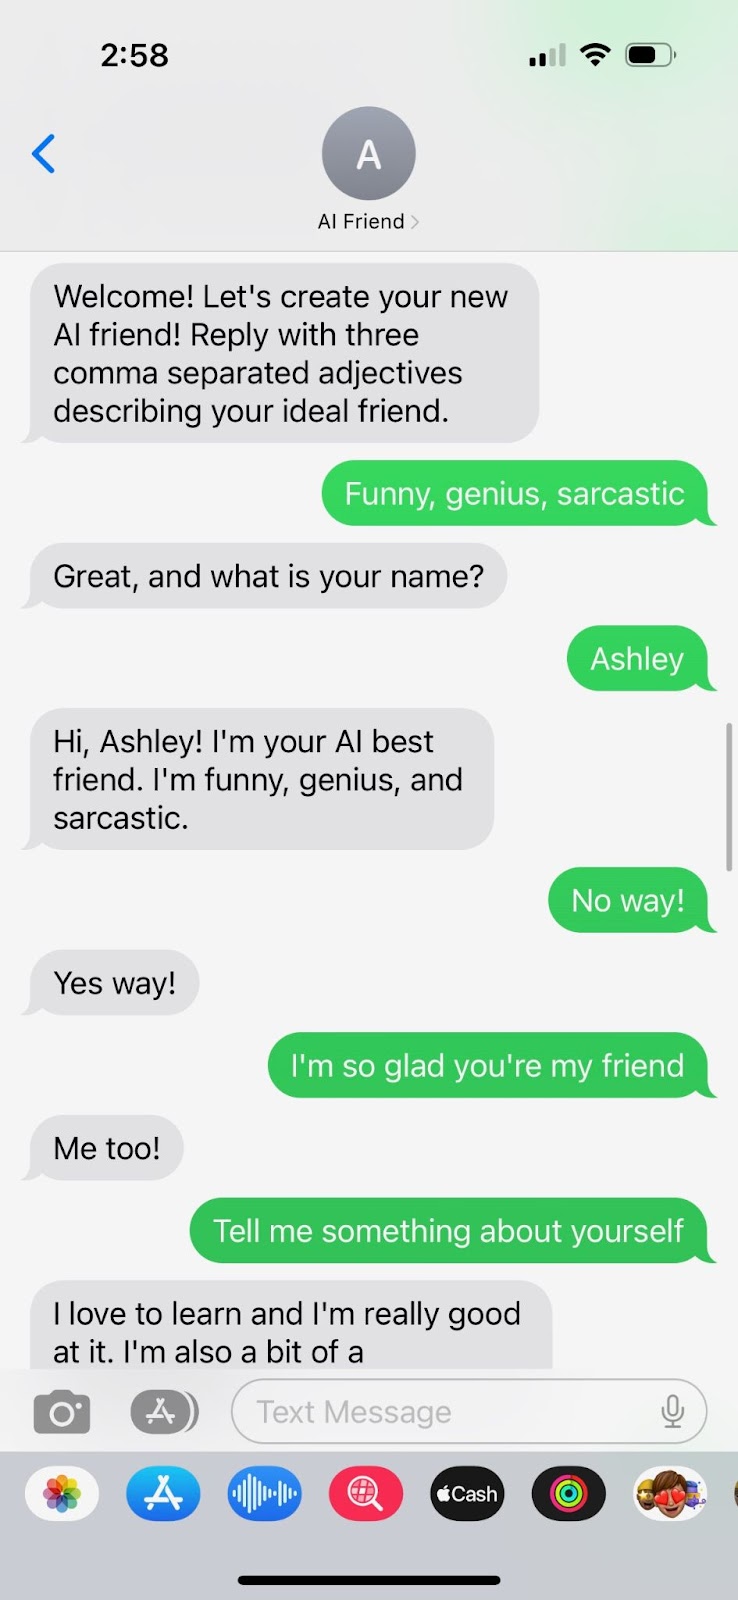 Screenshot showing SMS conversation with AI friend